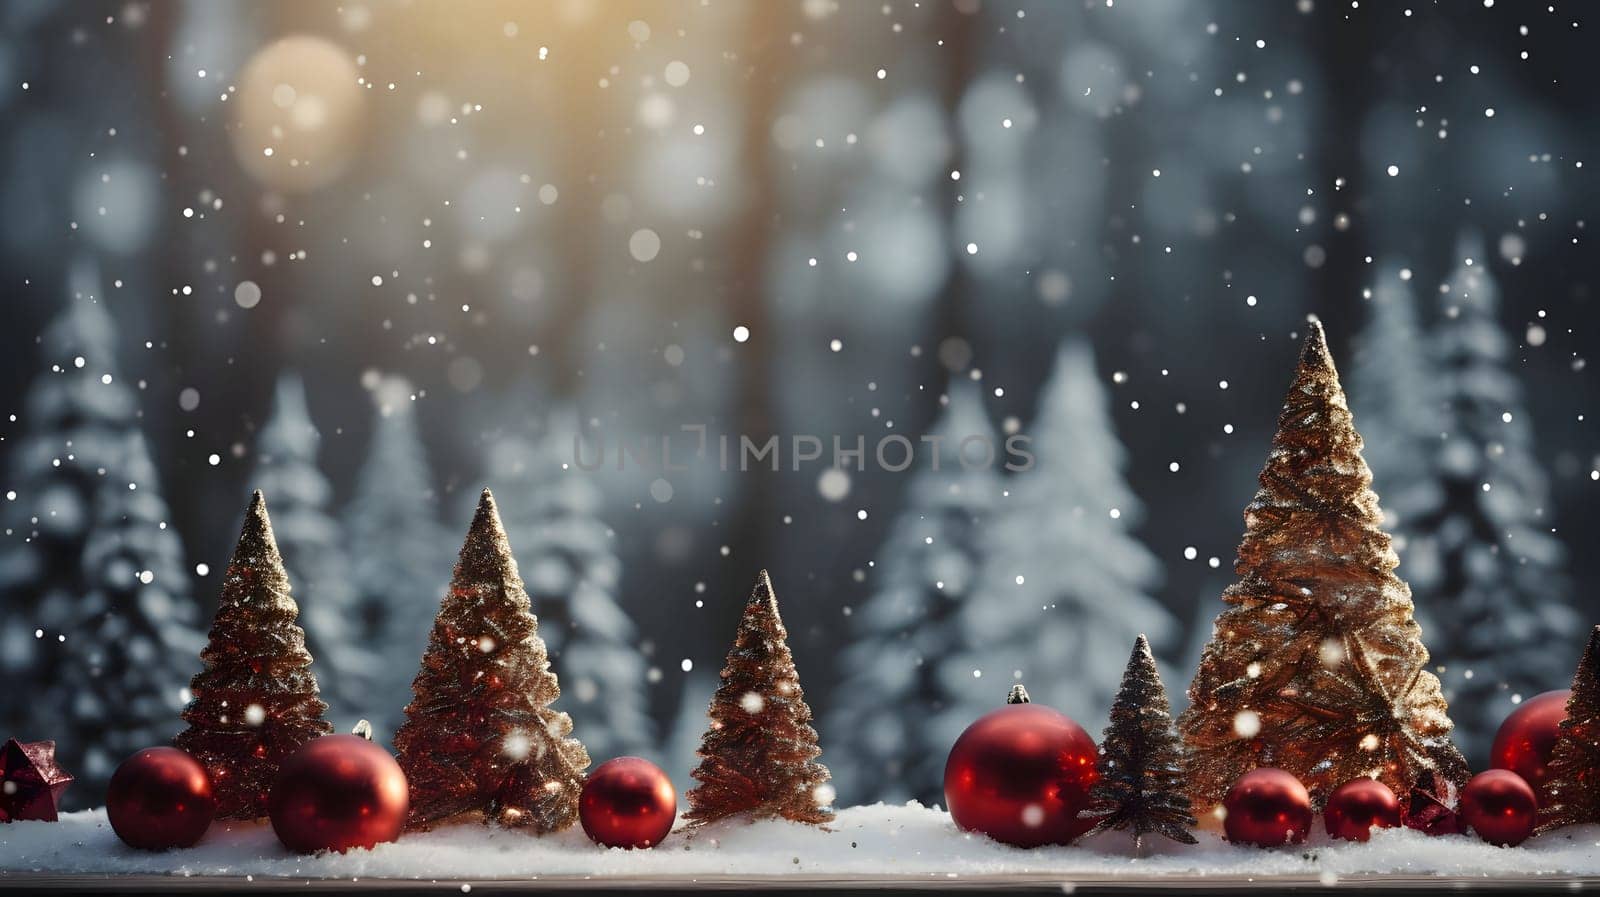 Small Christmas trees with red baubles on white snow in the middle. Blurred background of pine trees. Side view.Christmas banner with space for your own content. Blank field for the inscription.